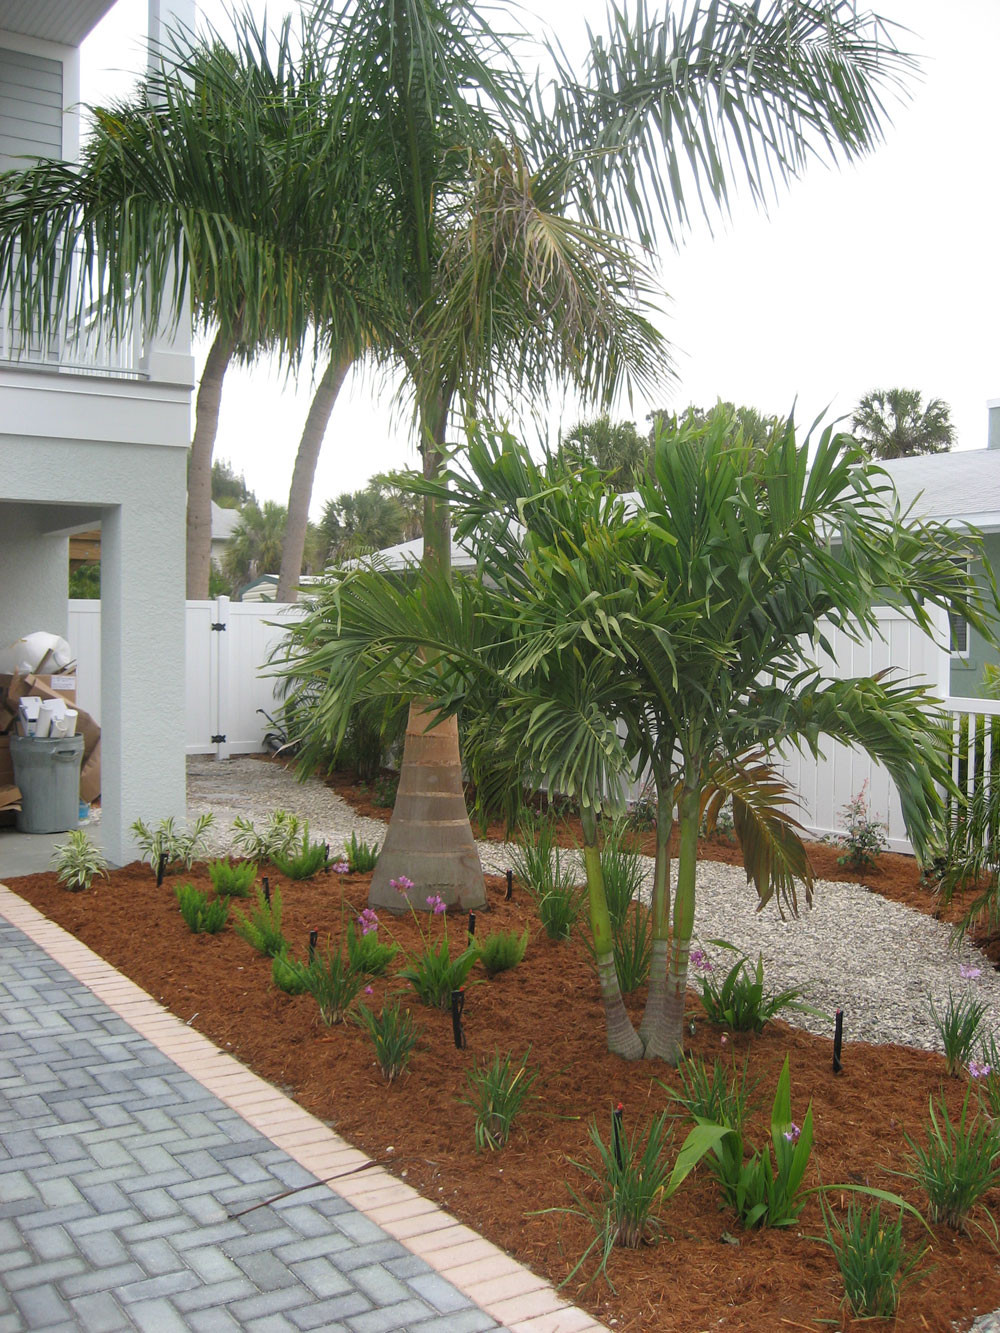 Backyard Palm Tree
 LANDSCAPING AND HOME GARDENS WITH PALM TREES